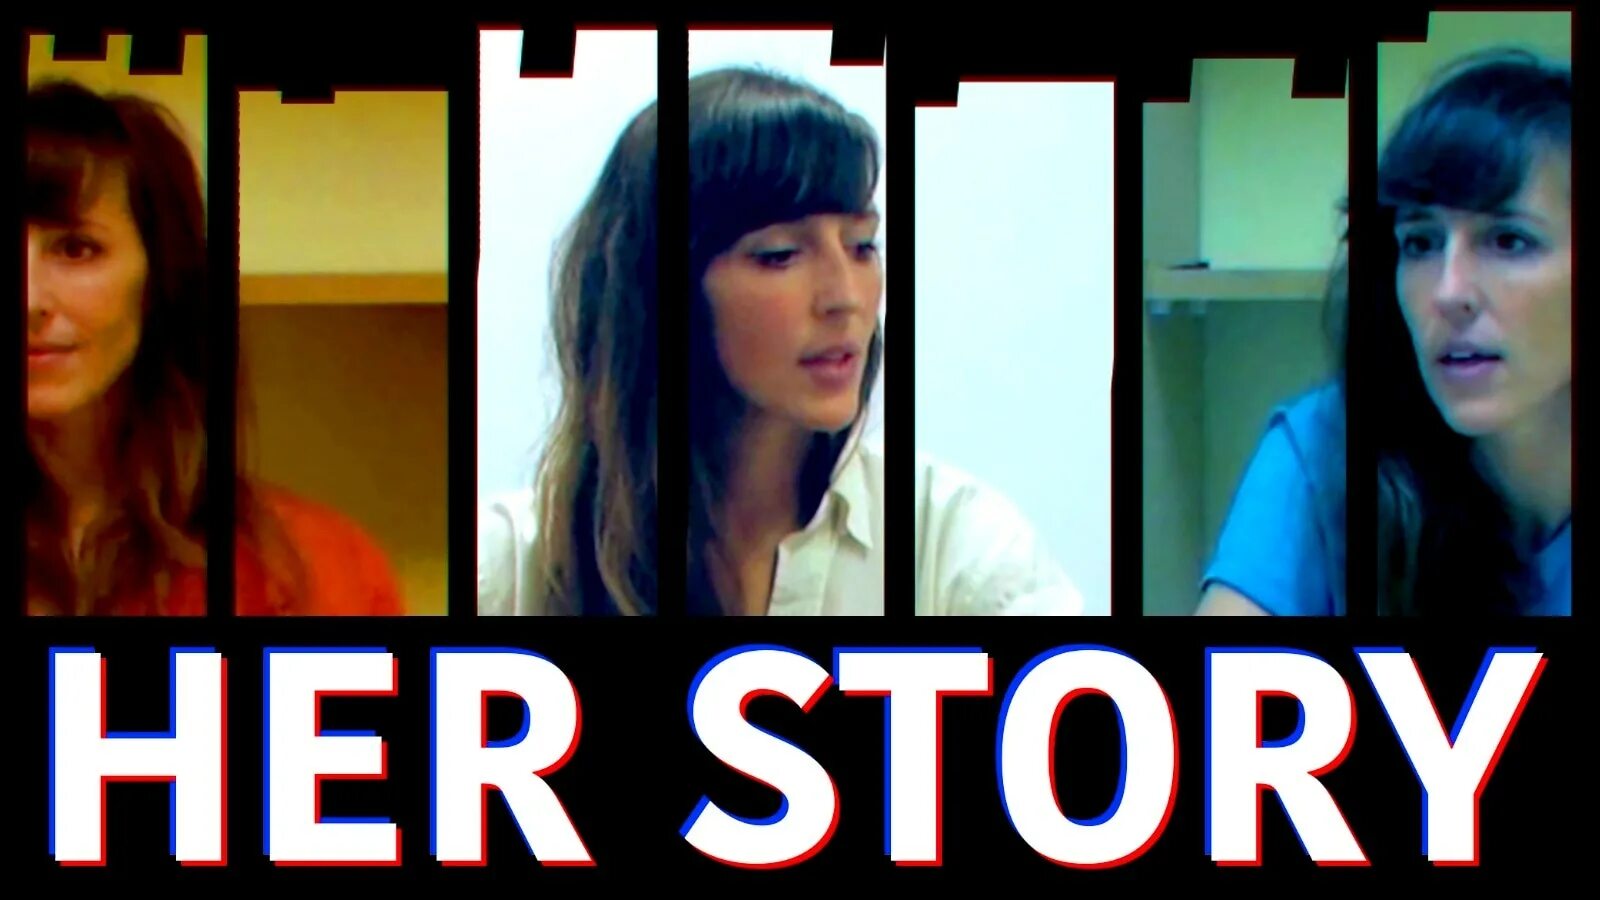 Her story. Her story 2015. Her story обложка. Her story game.